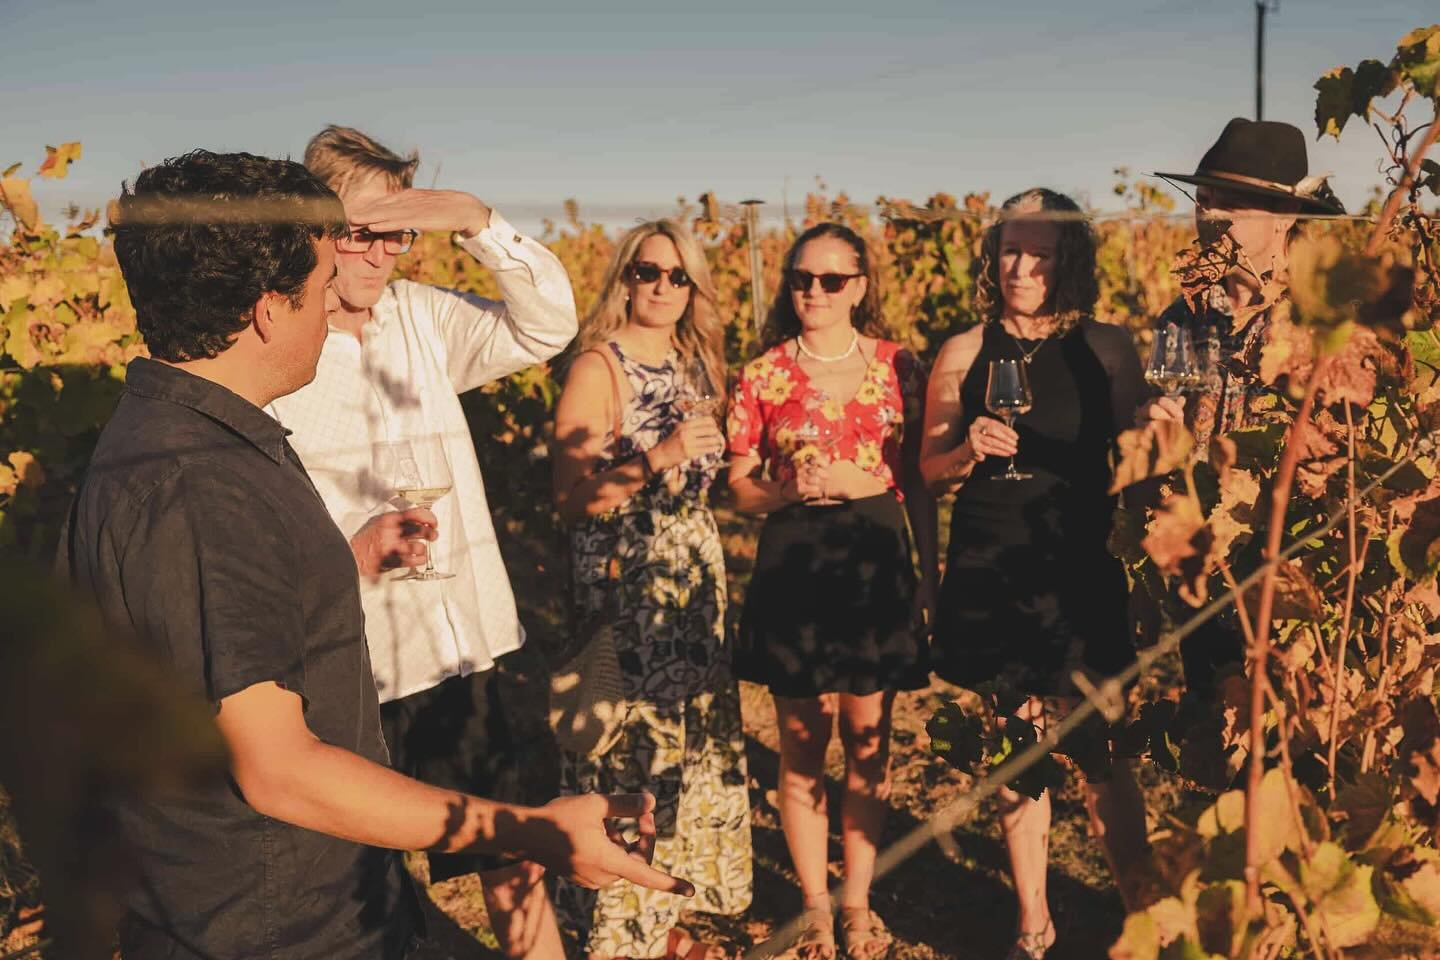 Next time you are in Margaret River and fancy doing a private tour give us a shout. This fantastic group loved their sunset tour, whilst drinking a beautiful glass of Chardonnay at the location it was grown. #privatewinetour #margaretriverwine #marga